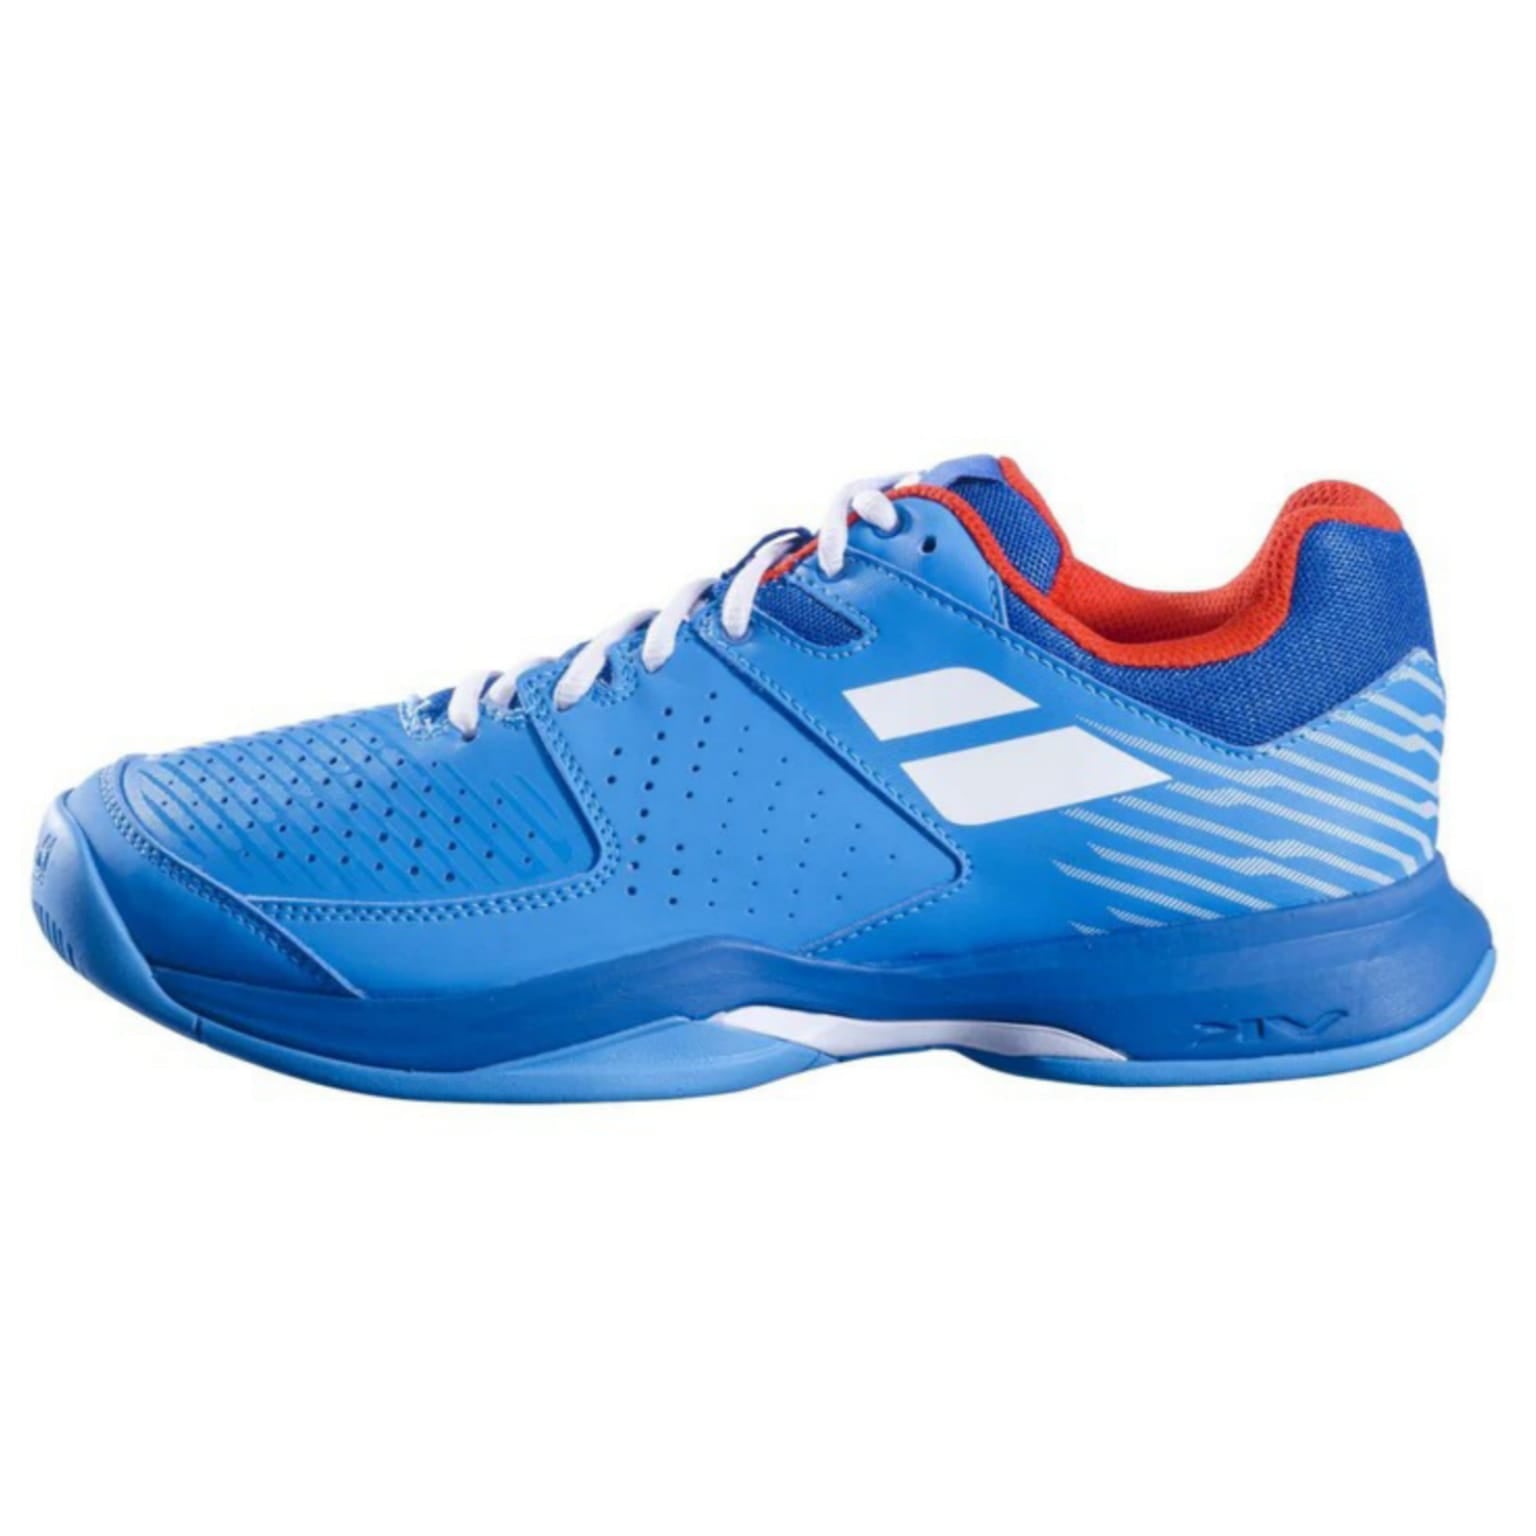 Tenis Babolat Cud Pulsion All Court (Blue/White)